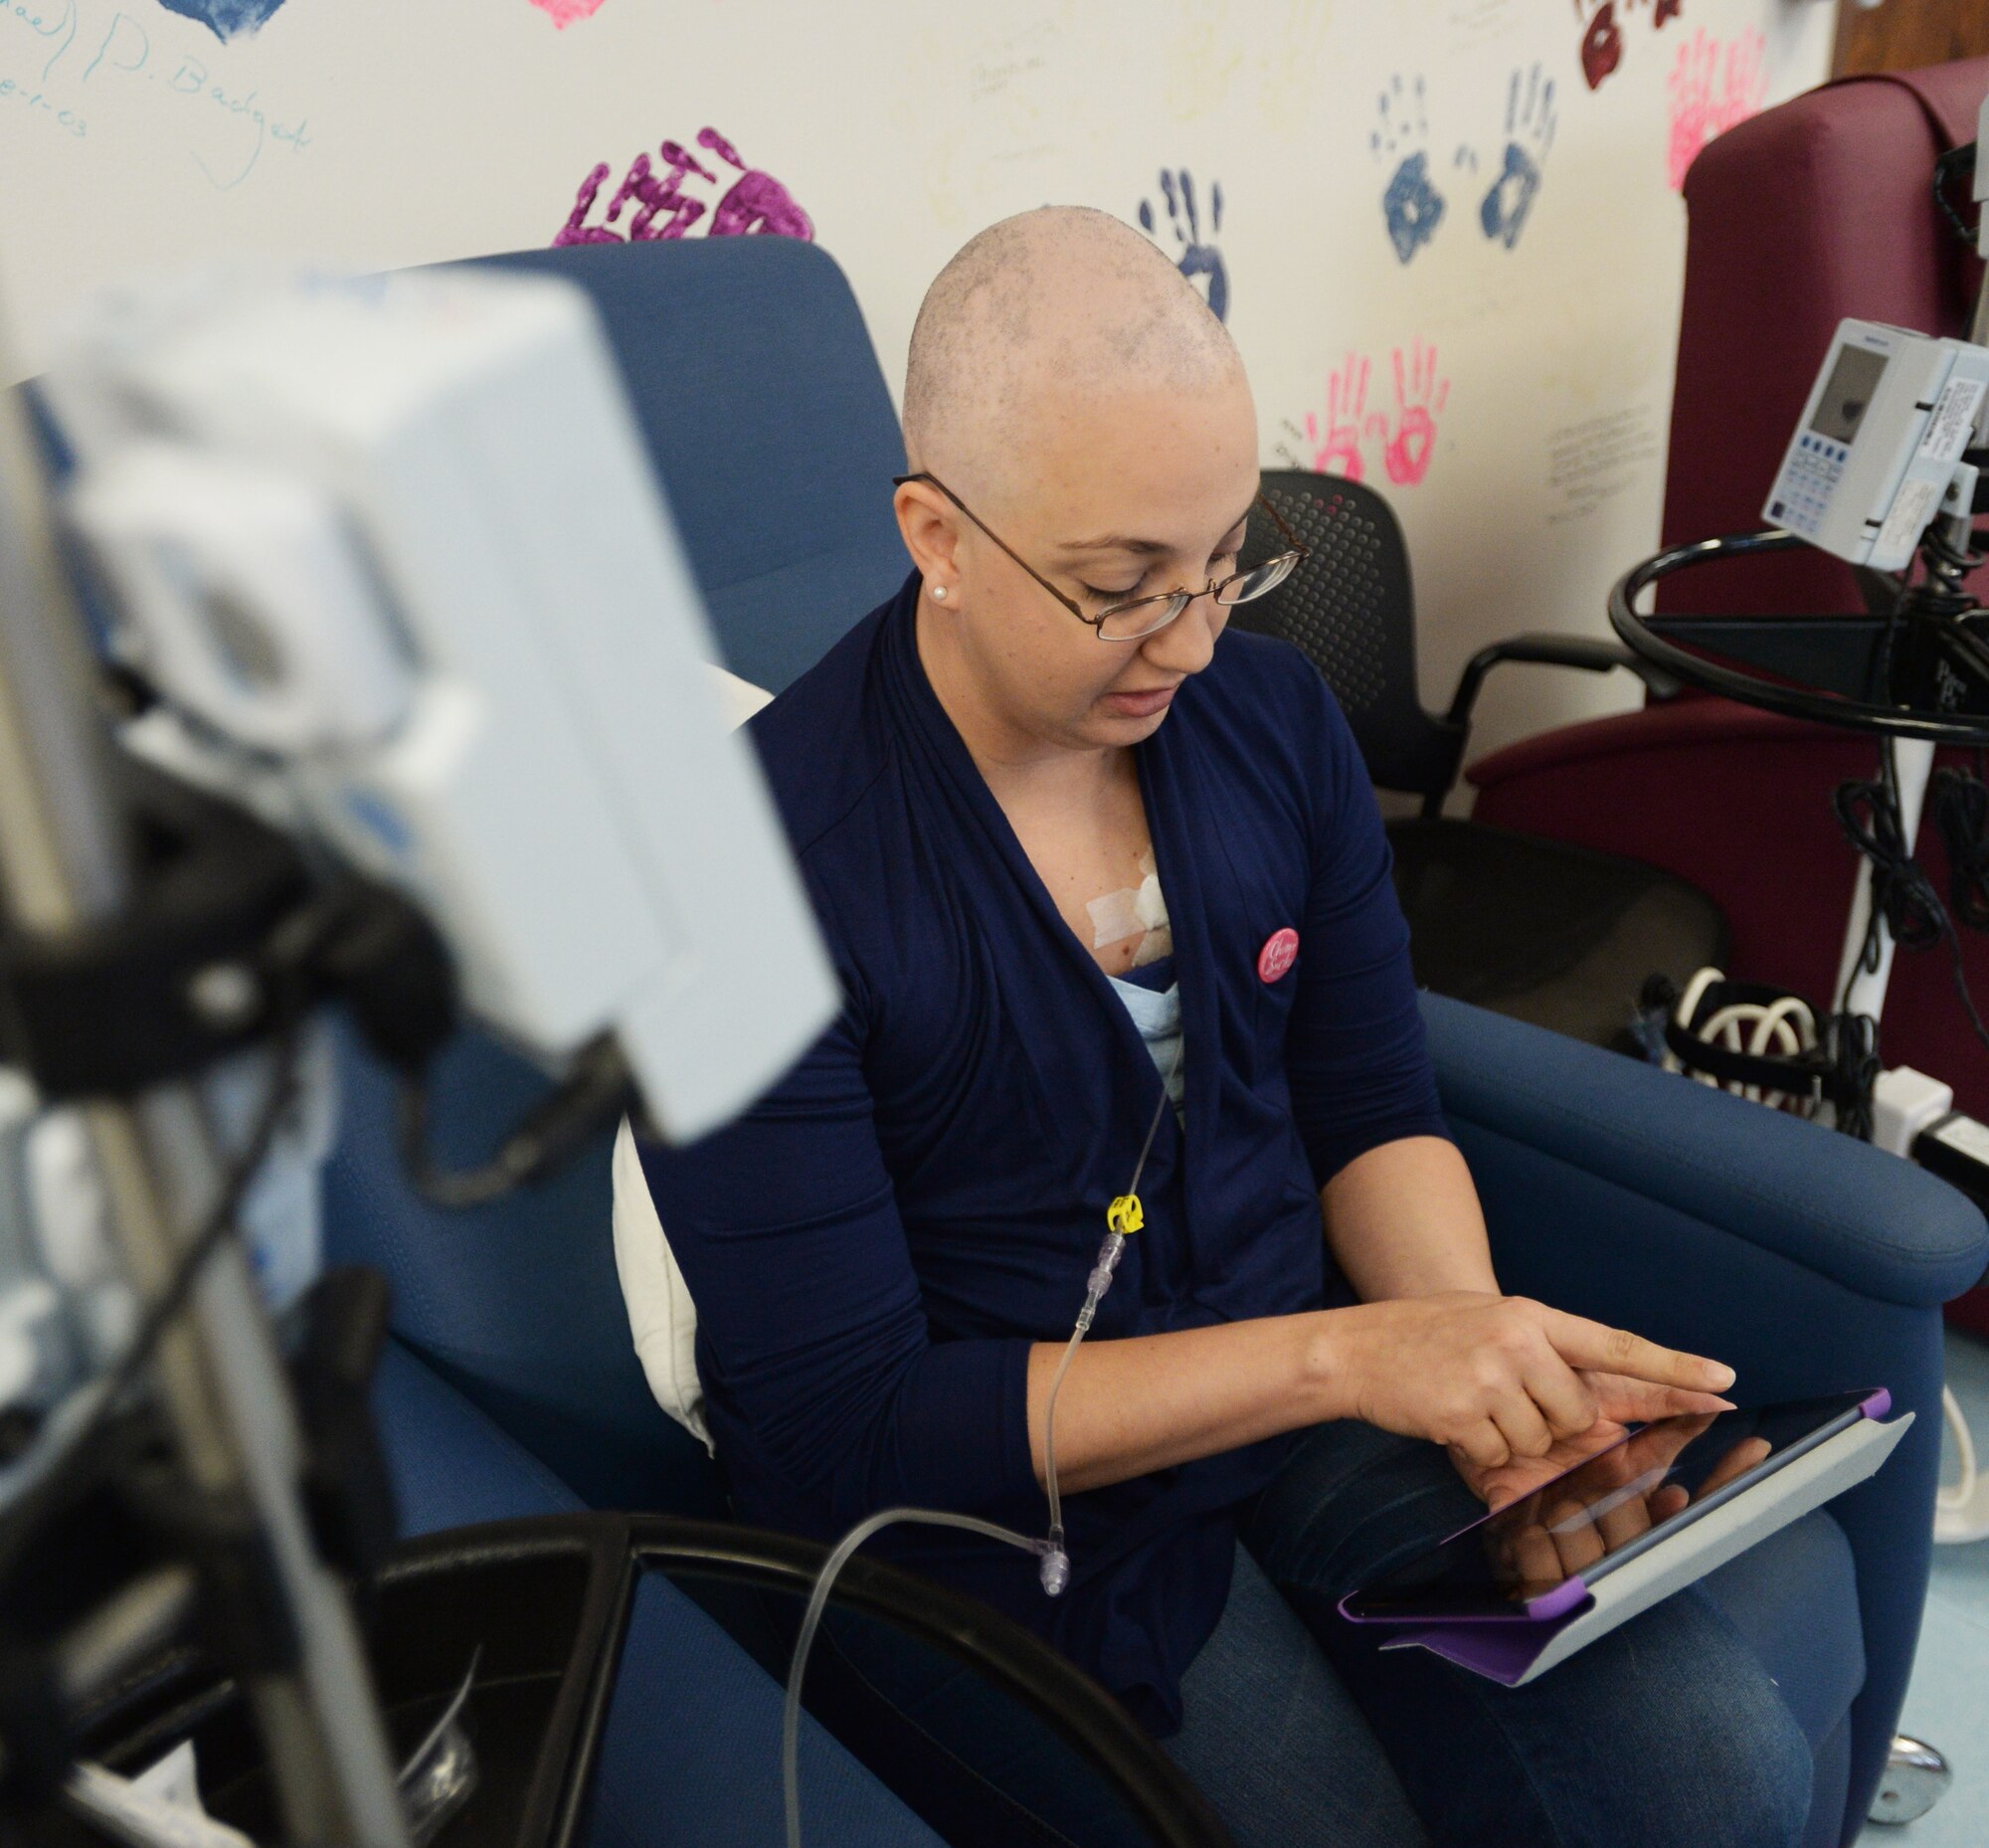 Staff Sgt. Amanda Dick, 15th Medical Support Squadron patient flight, reads an eBook during her chemotherapy treatment at Tripler Army Medical Center in Honolulu, Hawaii, Feb. 26, 2014. Since being diagnosed with breast cancer in October 2013, Dick has finished one of two rounds of chemotherapy, and is expected to be done with treatment in April. (U.S. Air Force photo/Staff Sgt. Alexander Martinez)